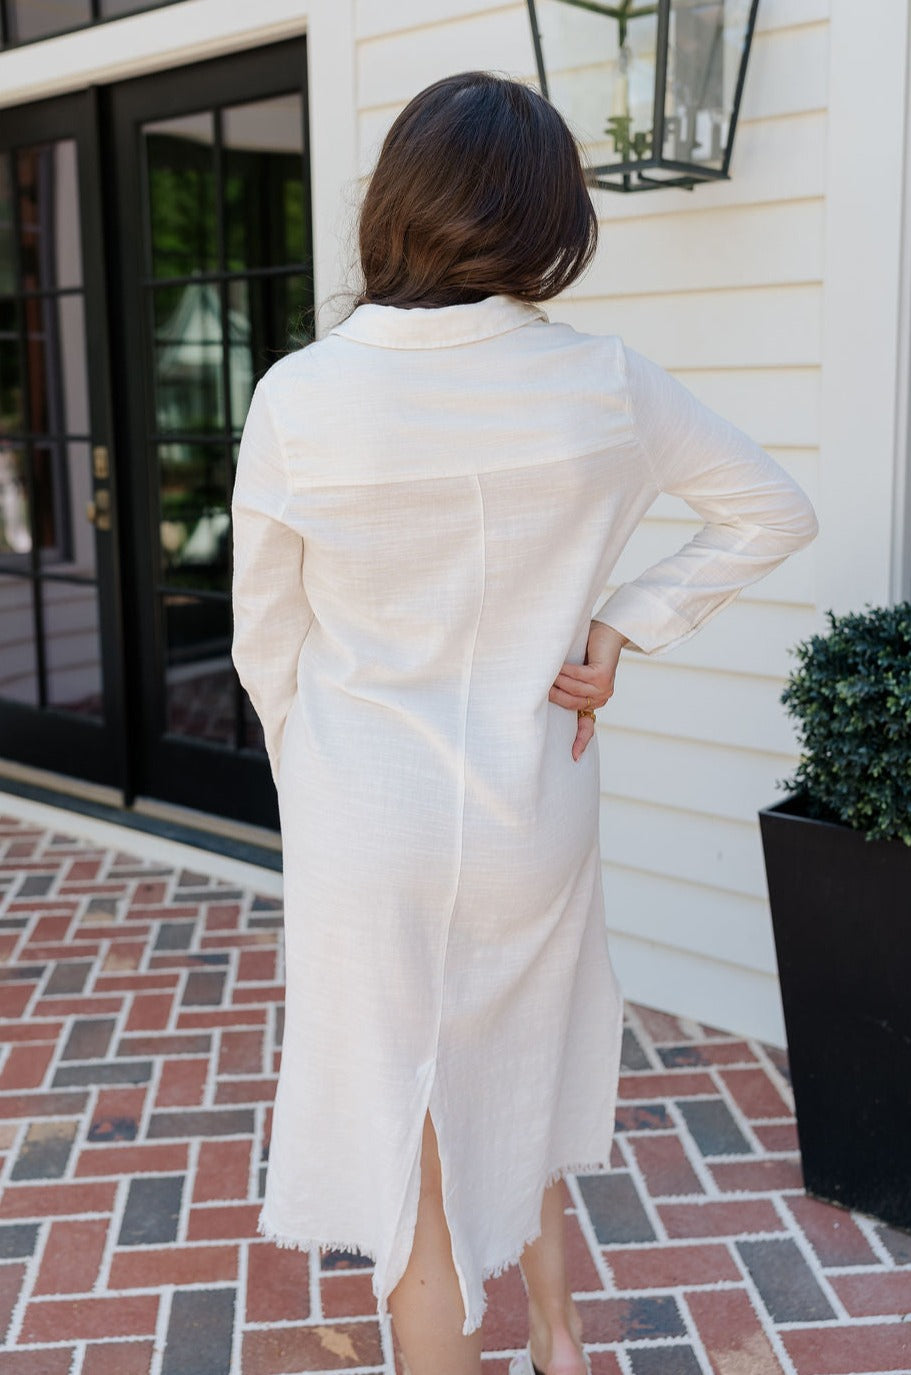 Back view of female model wearing the Everly White Button Up Midi Dress that has white fabric, long sleeves, a button up front, collar, chest pockets, and a frayed high-low hemline with back slit.